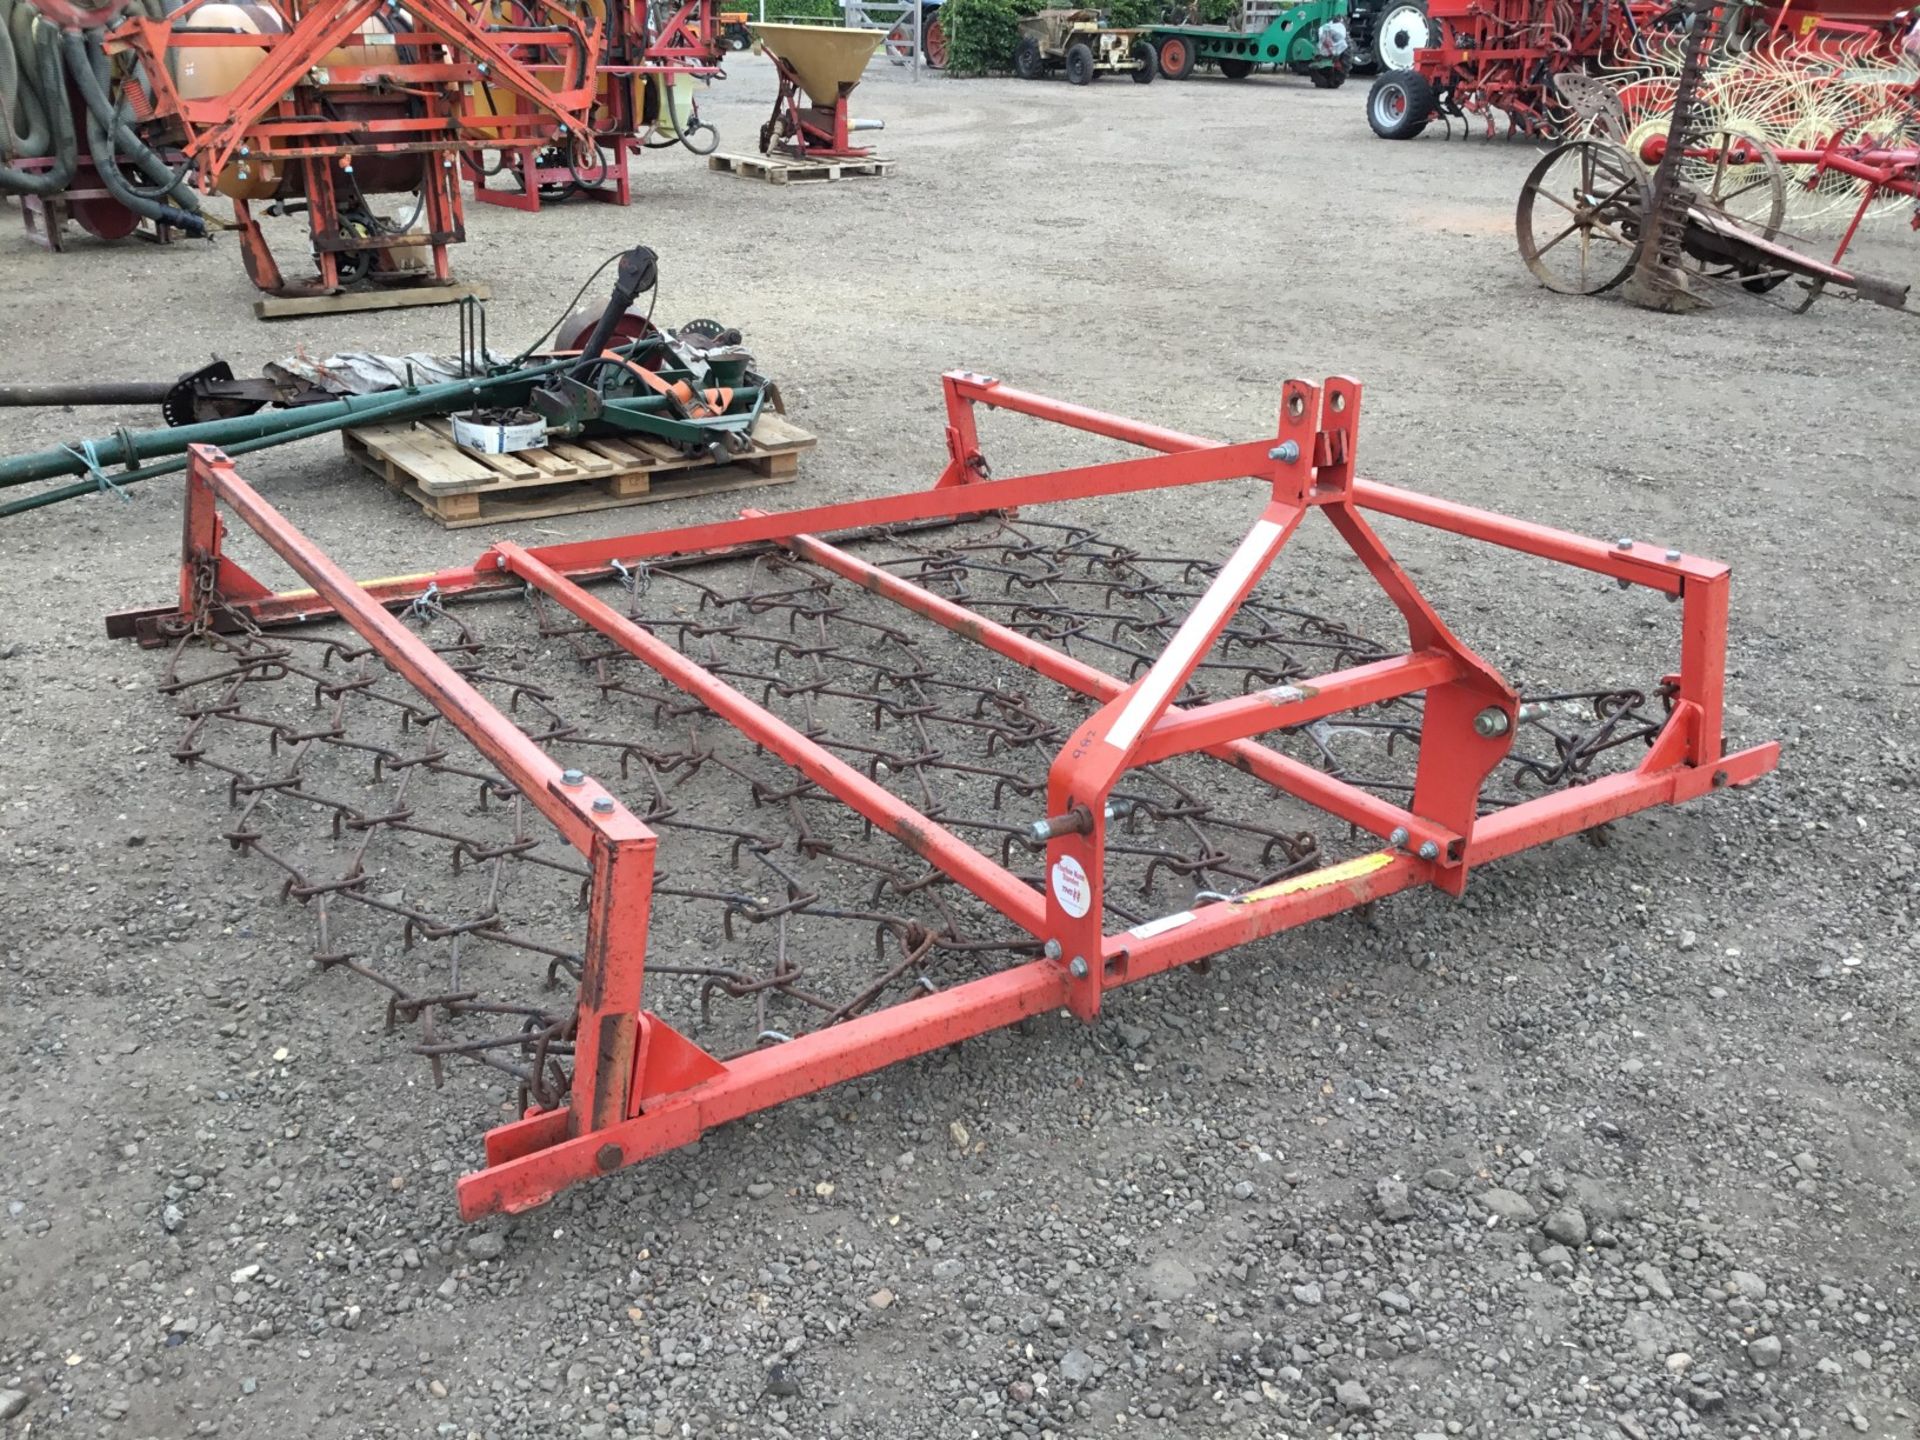 Parmiter 3m Pro mounted chain harrows with manual fold wings.